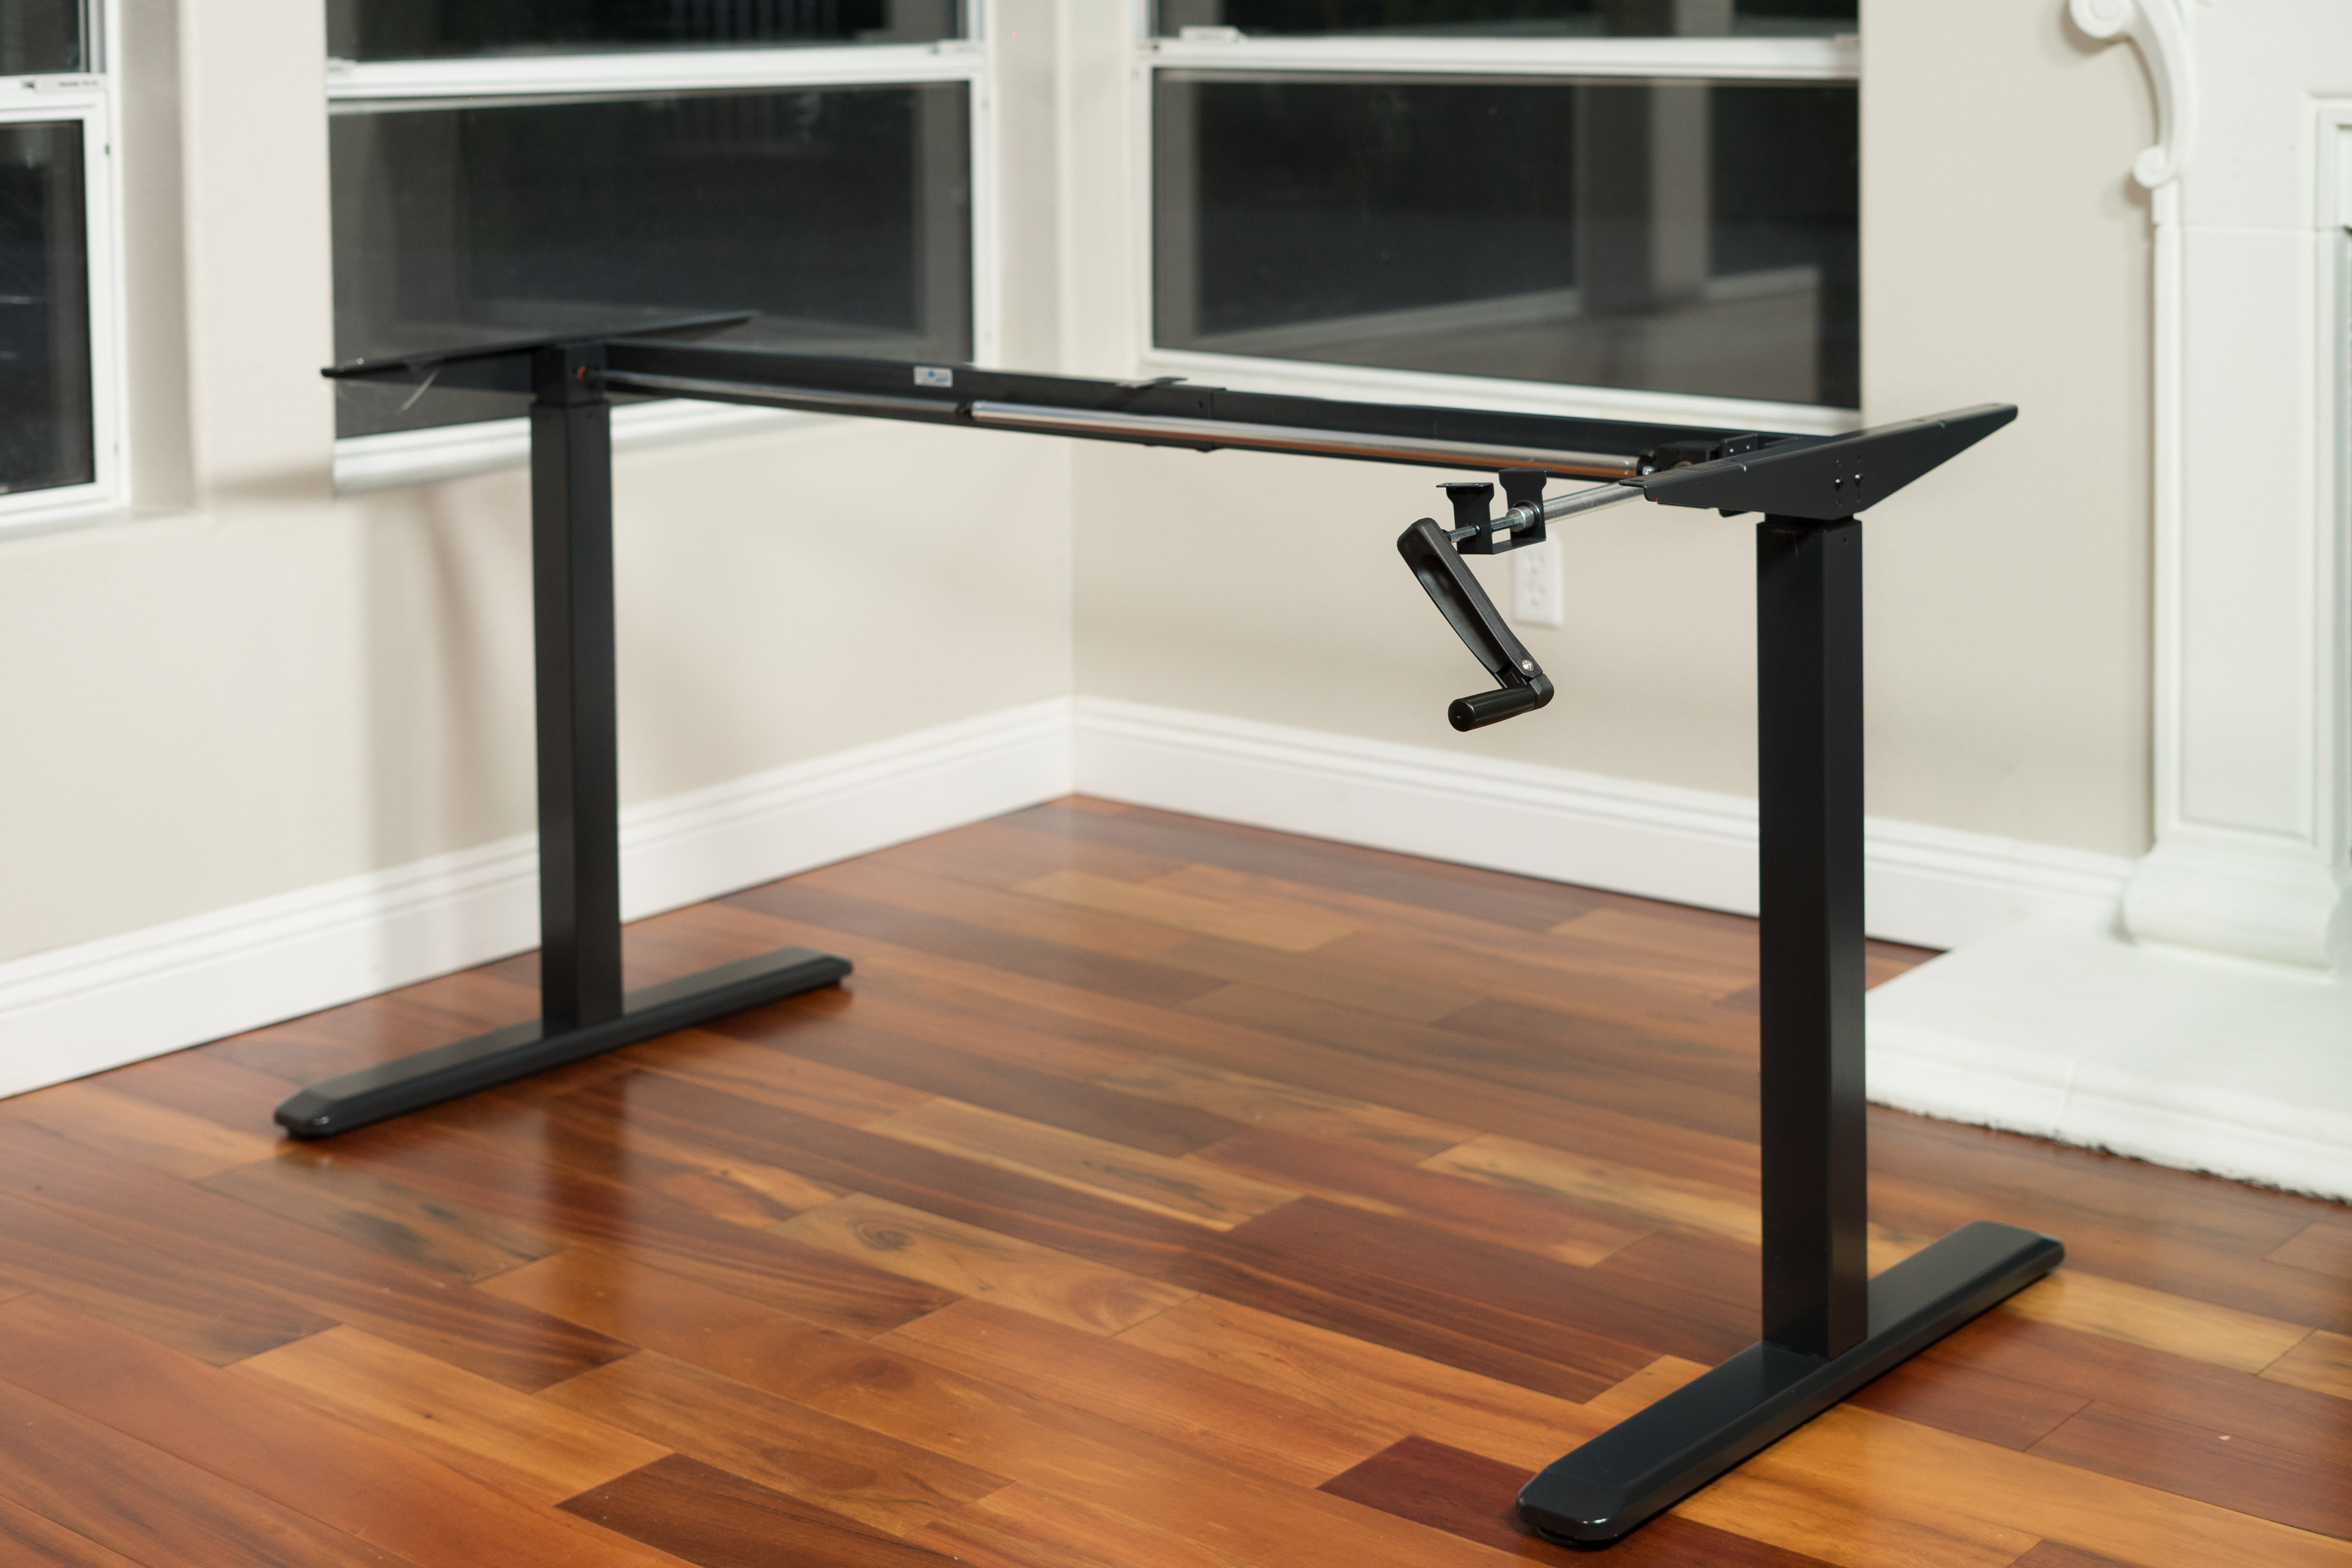 ErgoMax Black Height Adjustable Crank Desk Frame, Tabletop Not Included, 45 Inch Max Height - image 5 of 8